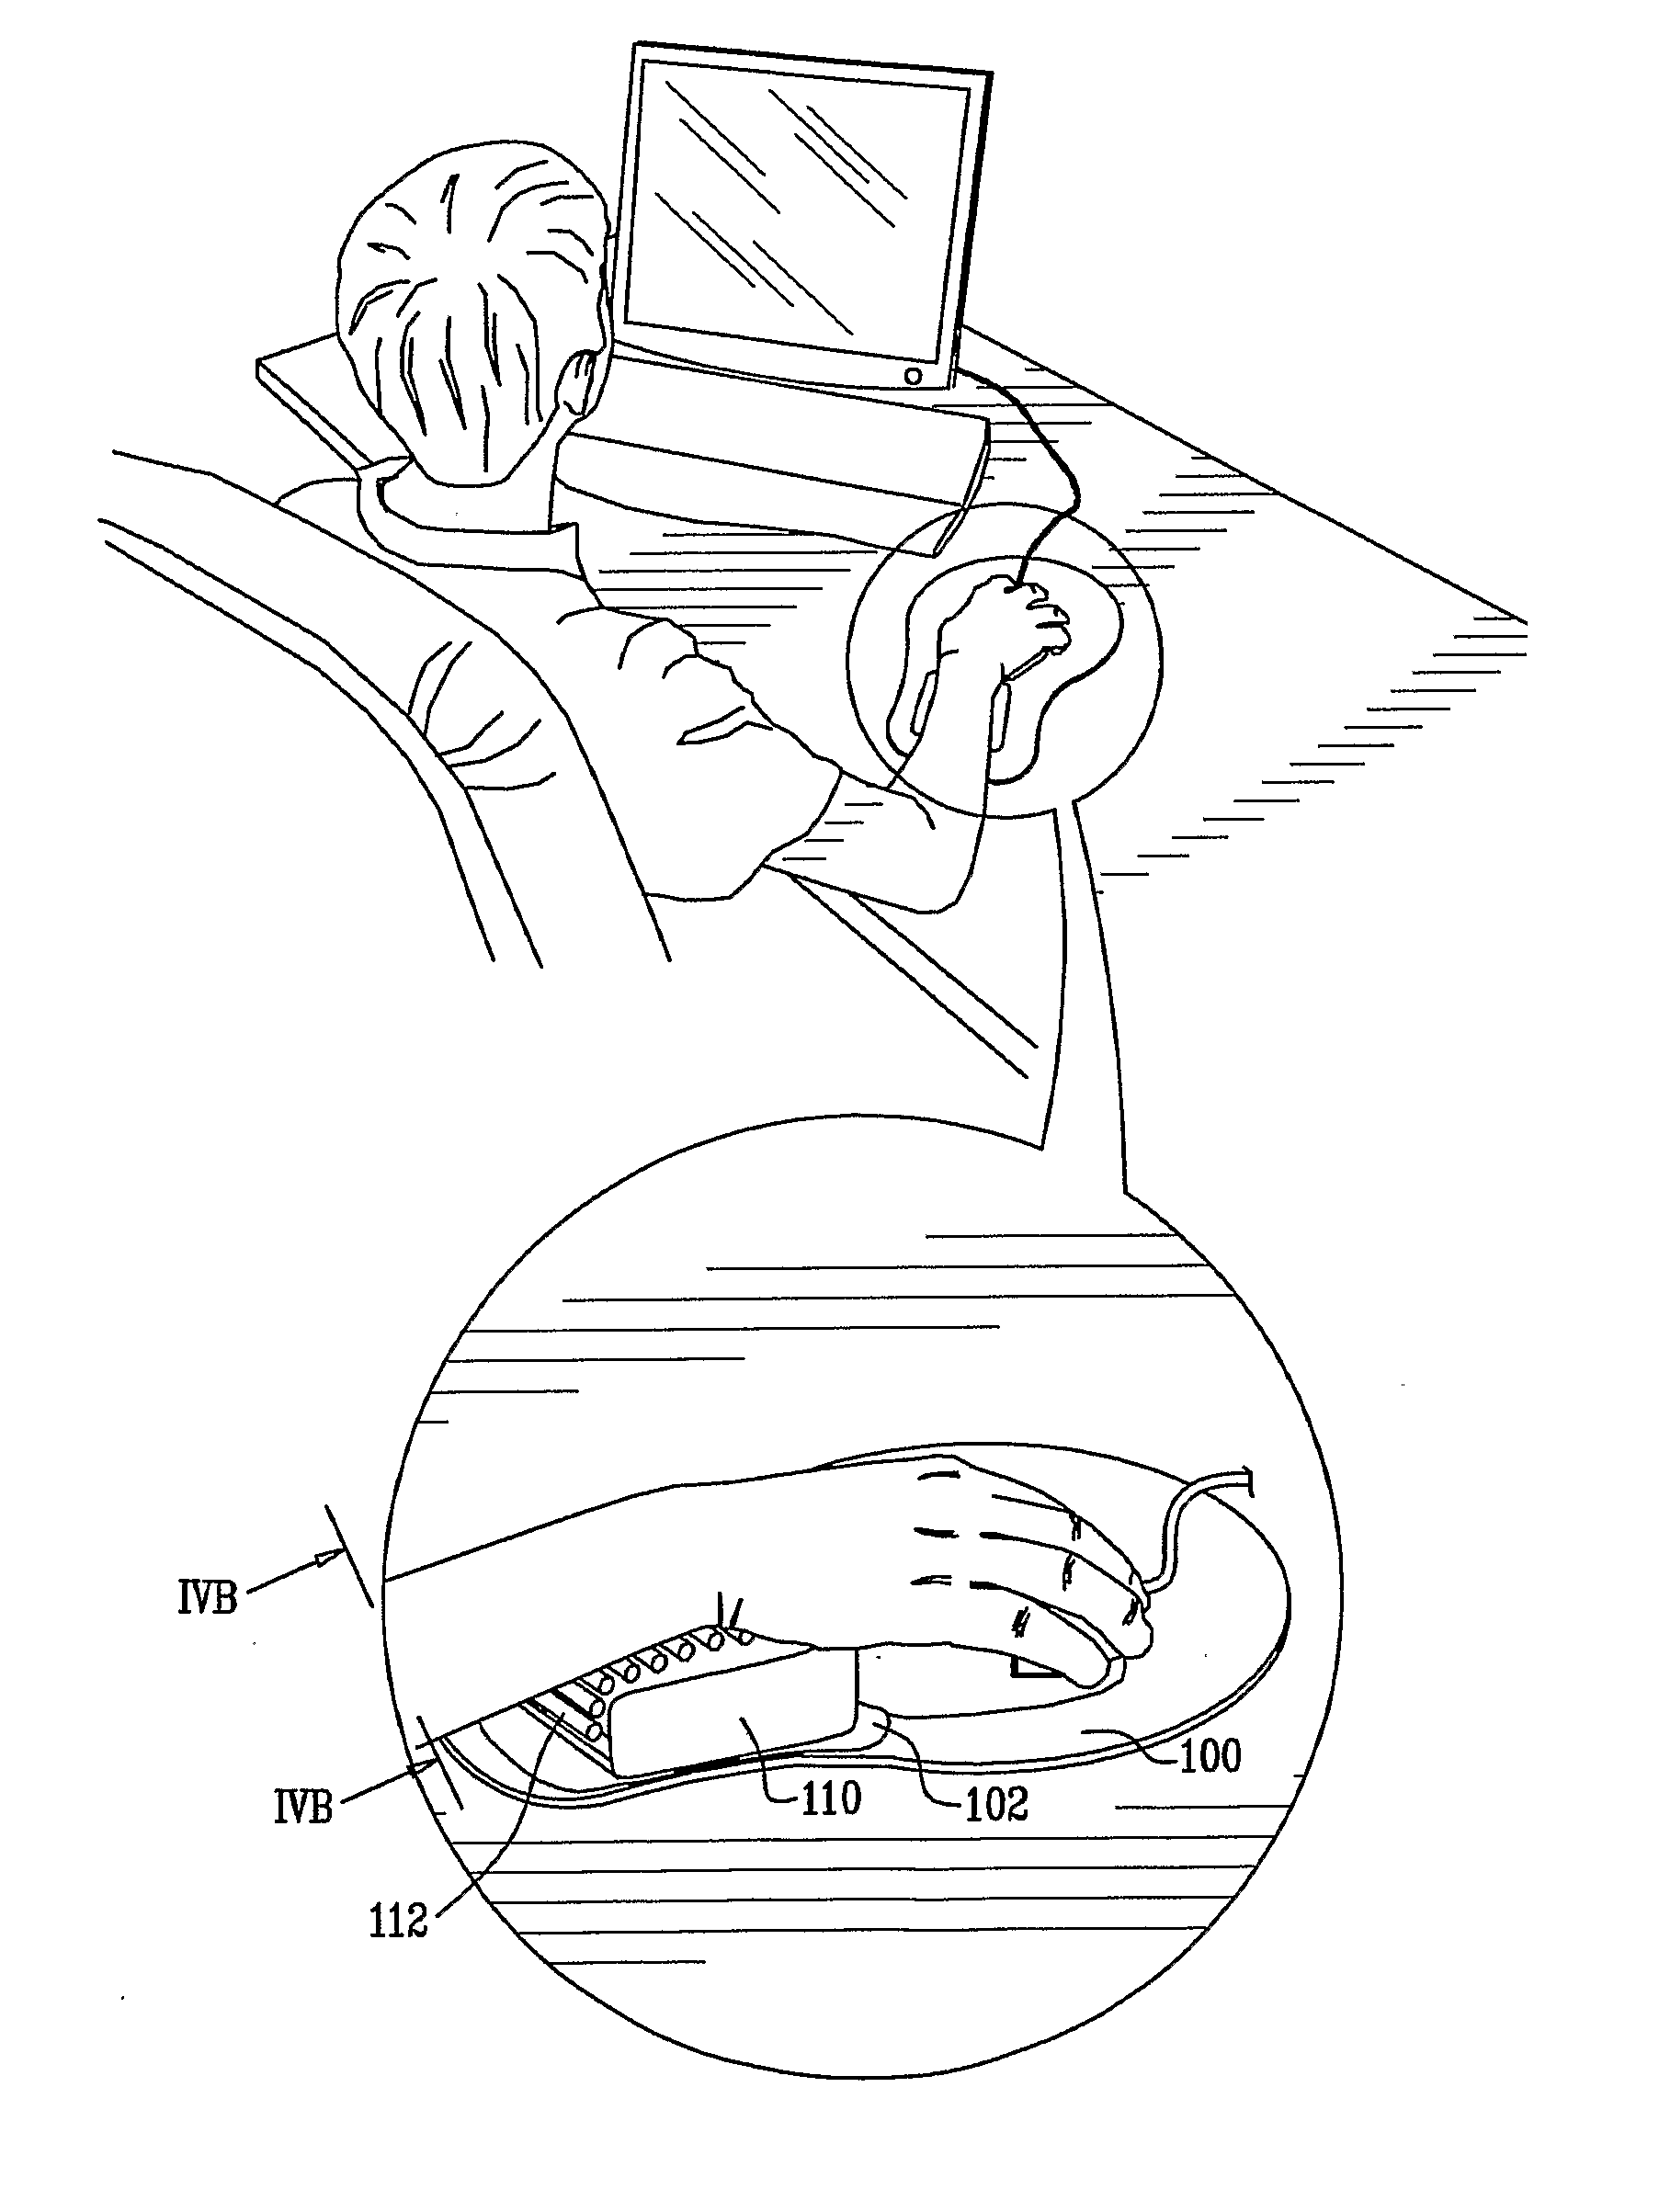 Carpal active protection systems (CAPS)